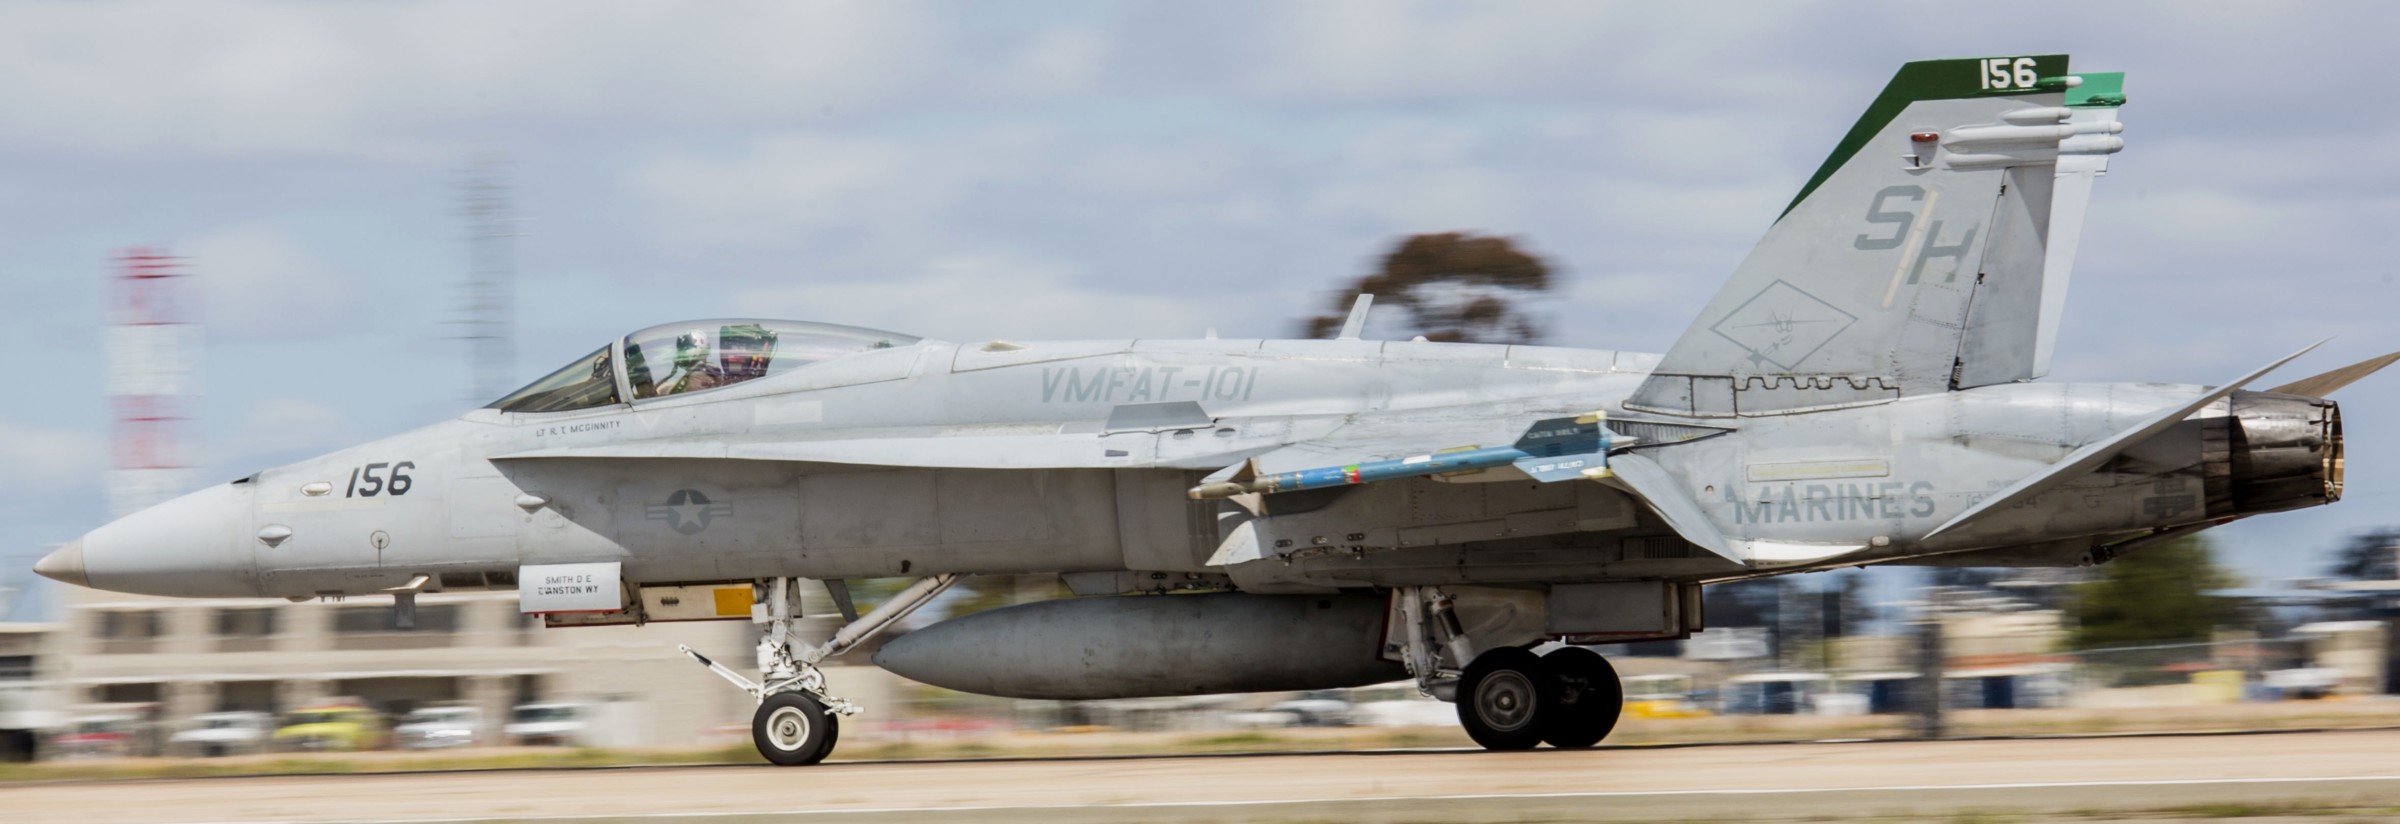 vmfat-101 sharpshooters marine fighter attack squadron usmc f/a-18 hornet replacement 92 mcas miramar